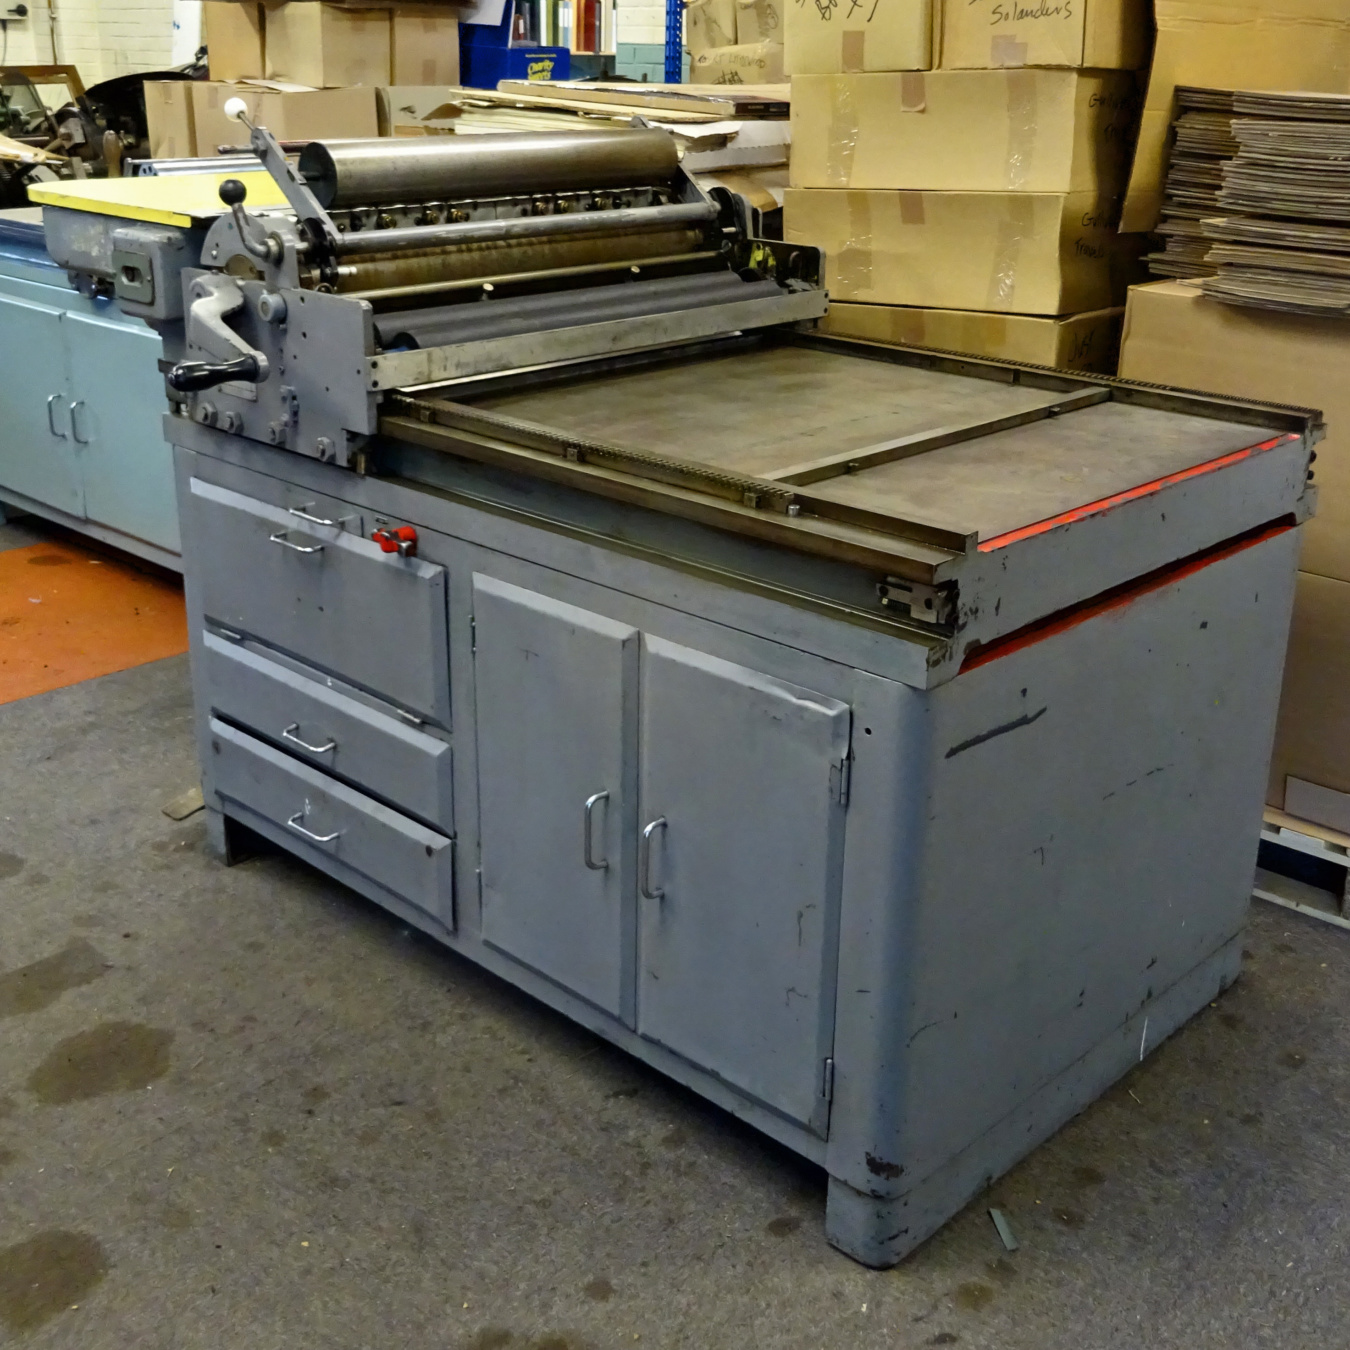 The British 4c/30 Western proofing press for sale